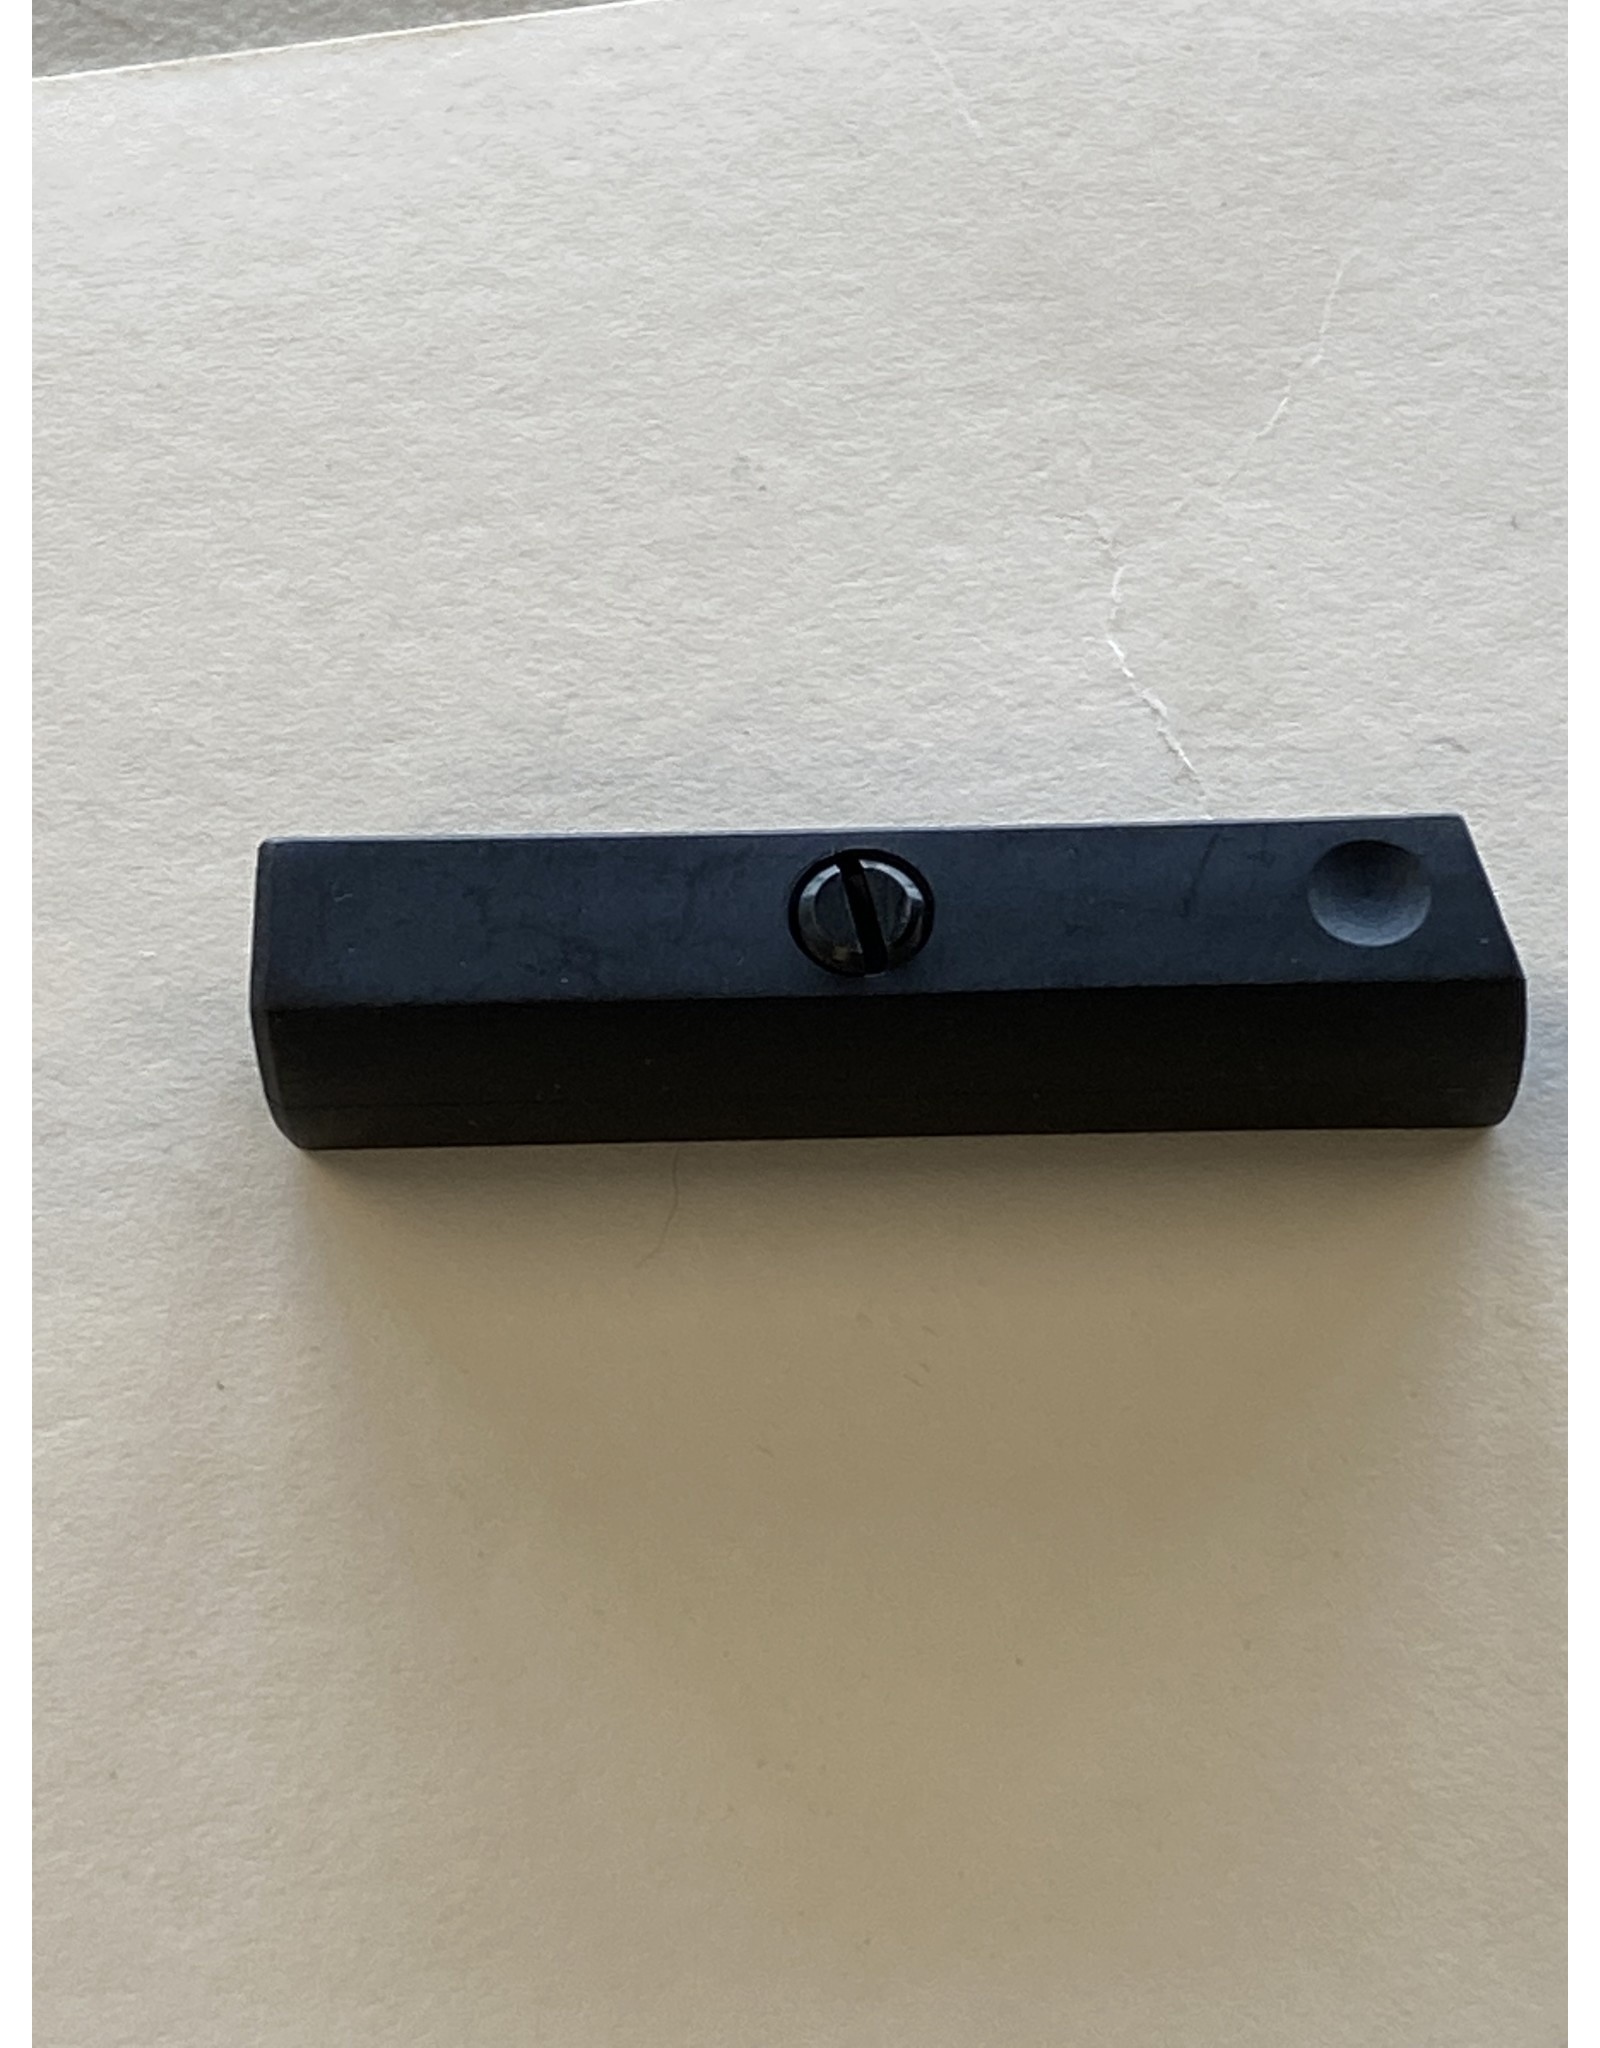 Xesse/Trailside Frame Extension, New (Plastic)